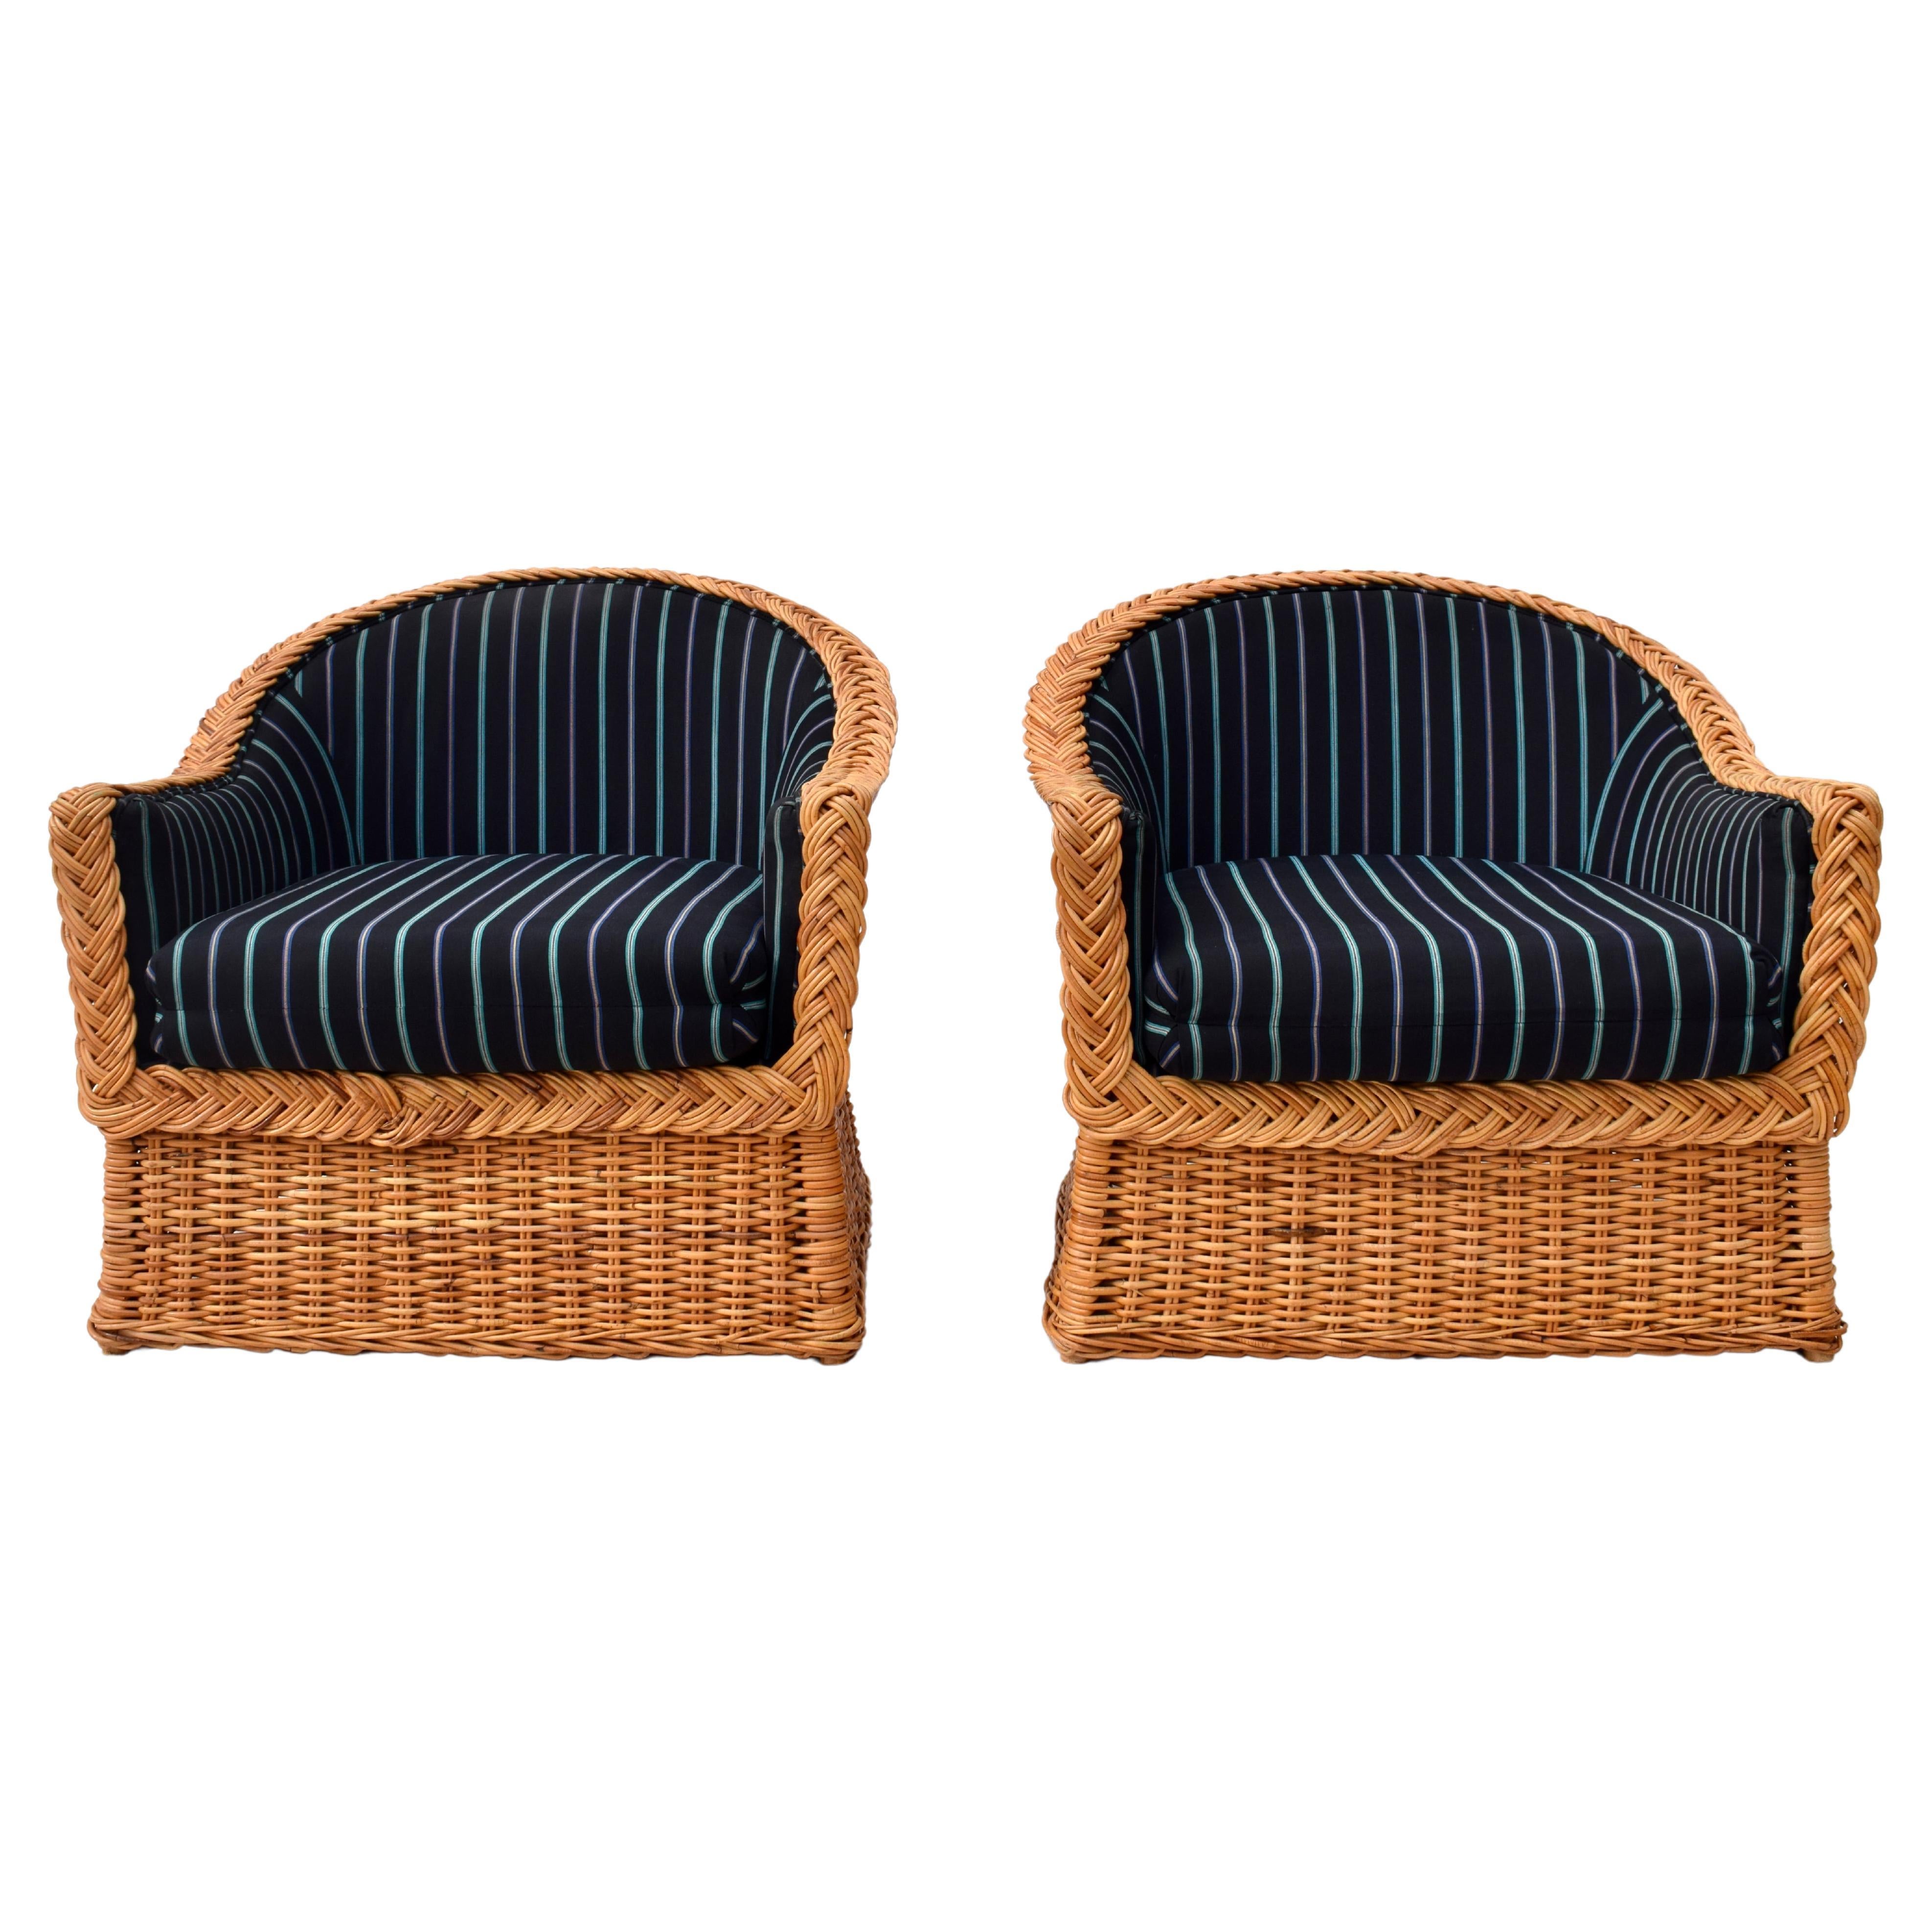 1980's Wicker Works Braided Rattan Club Chairs, Pair For Sale